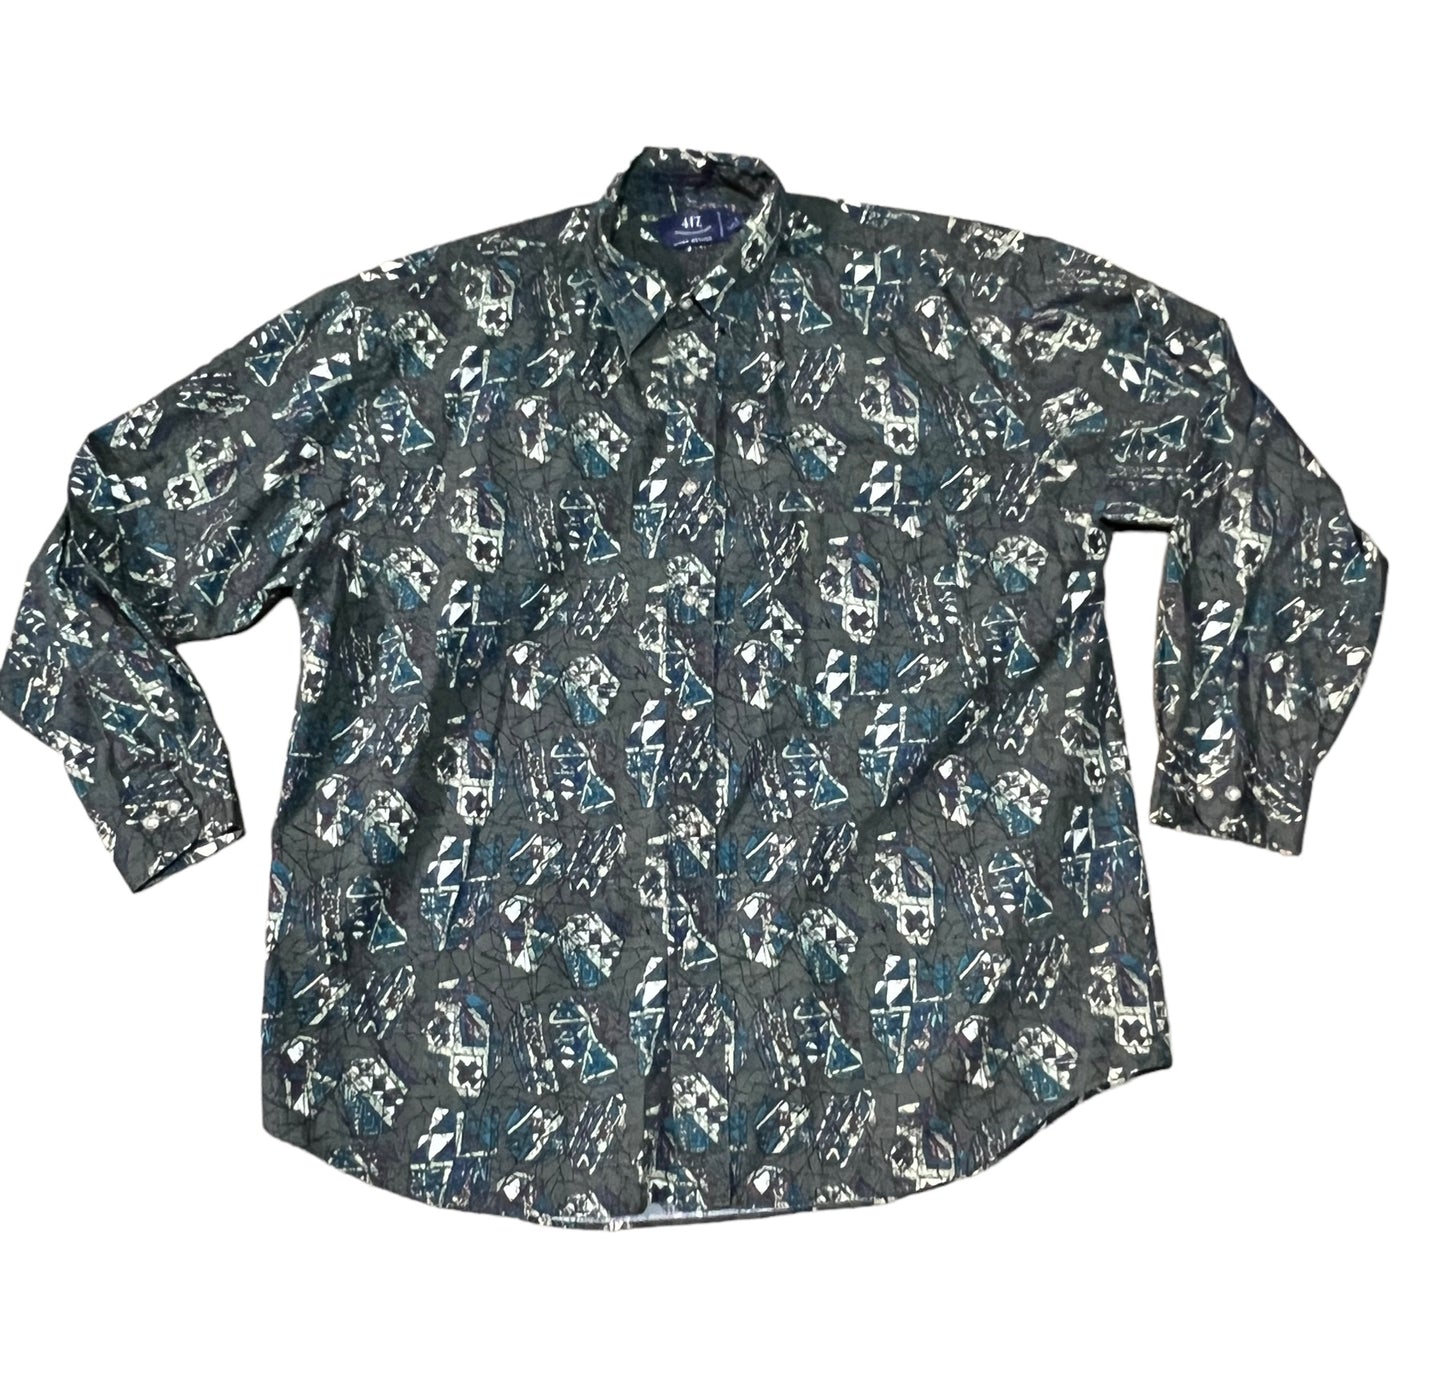 Vintage 1990s Abstract Graphic Button Down